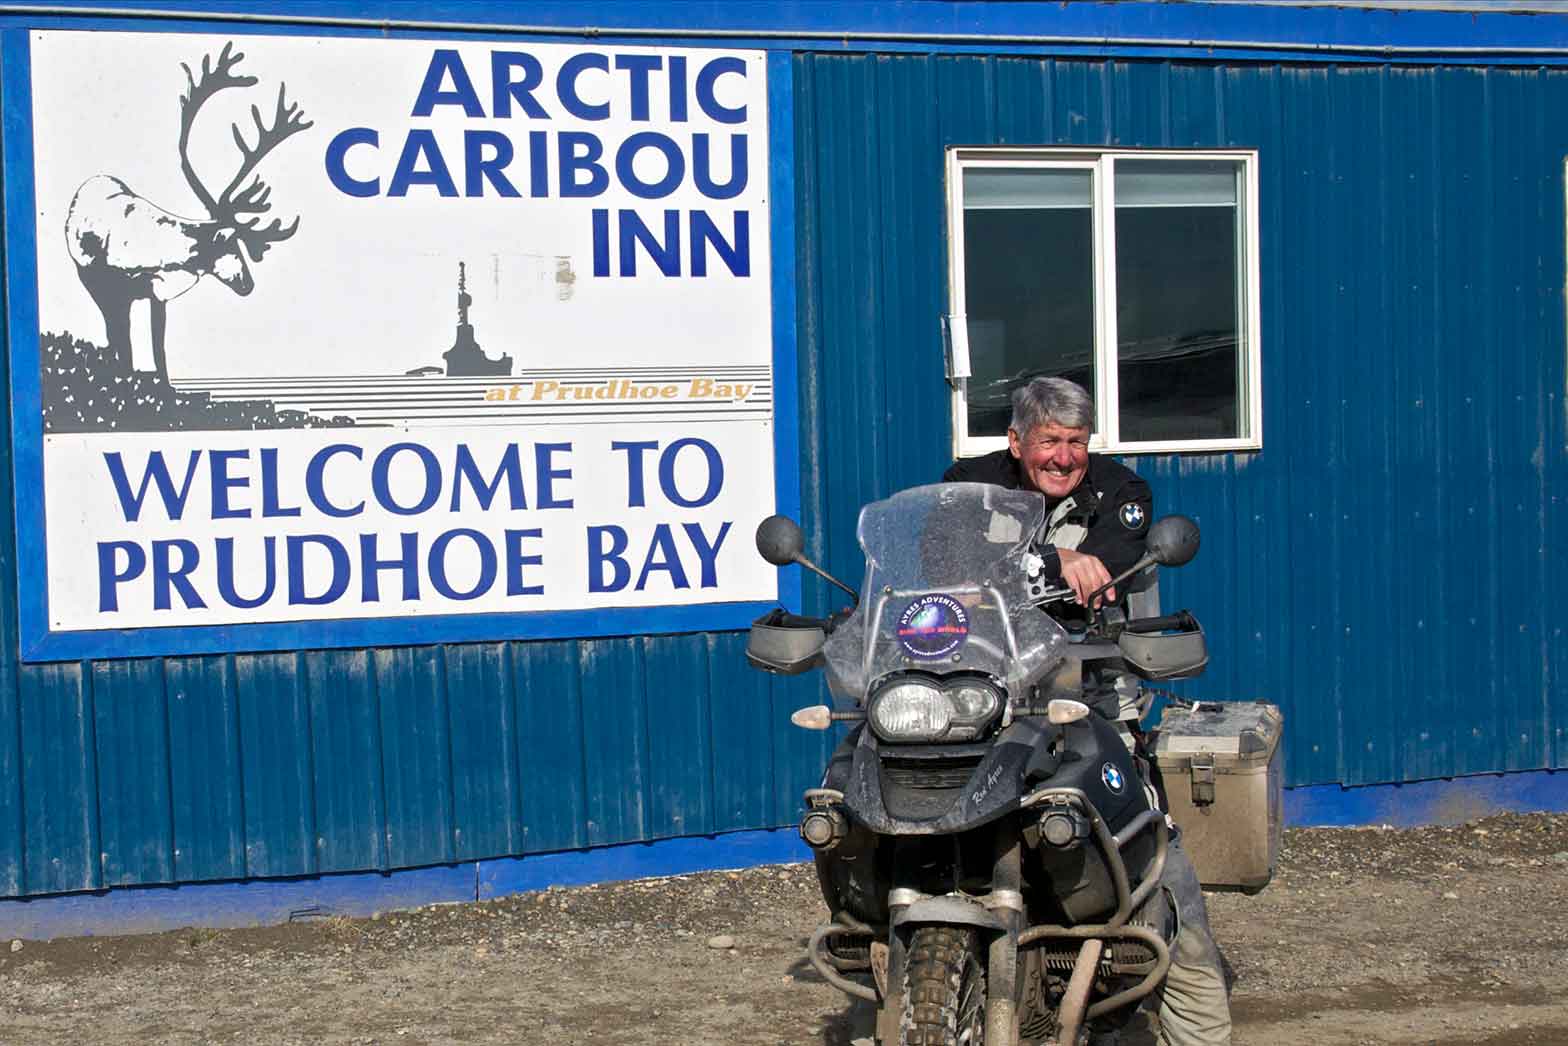 Welcome to Prudhoe Bay